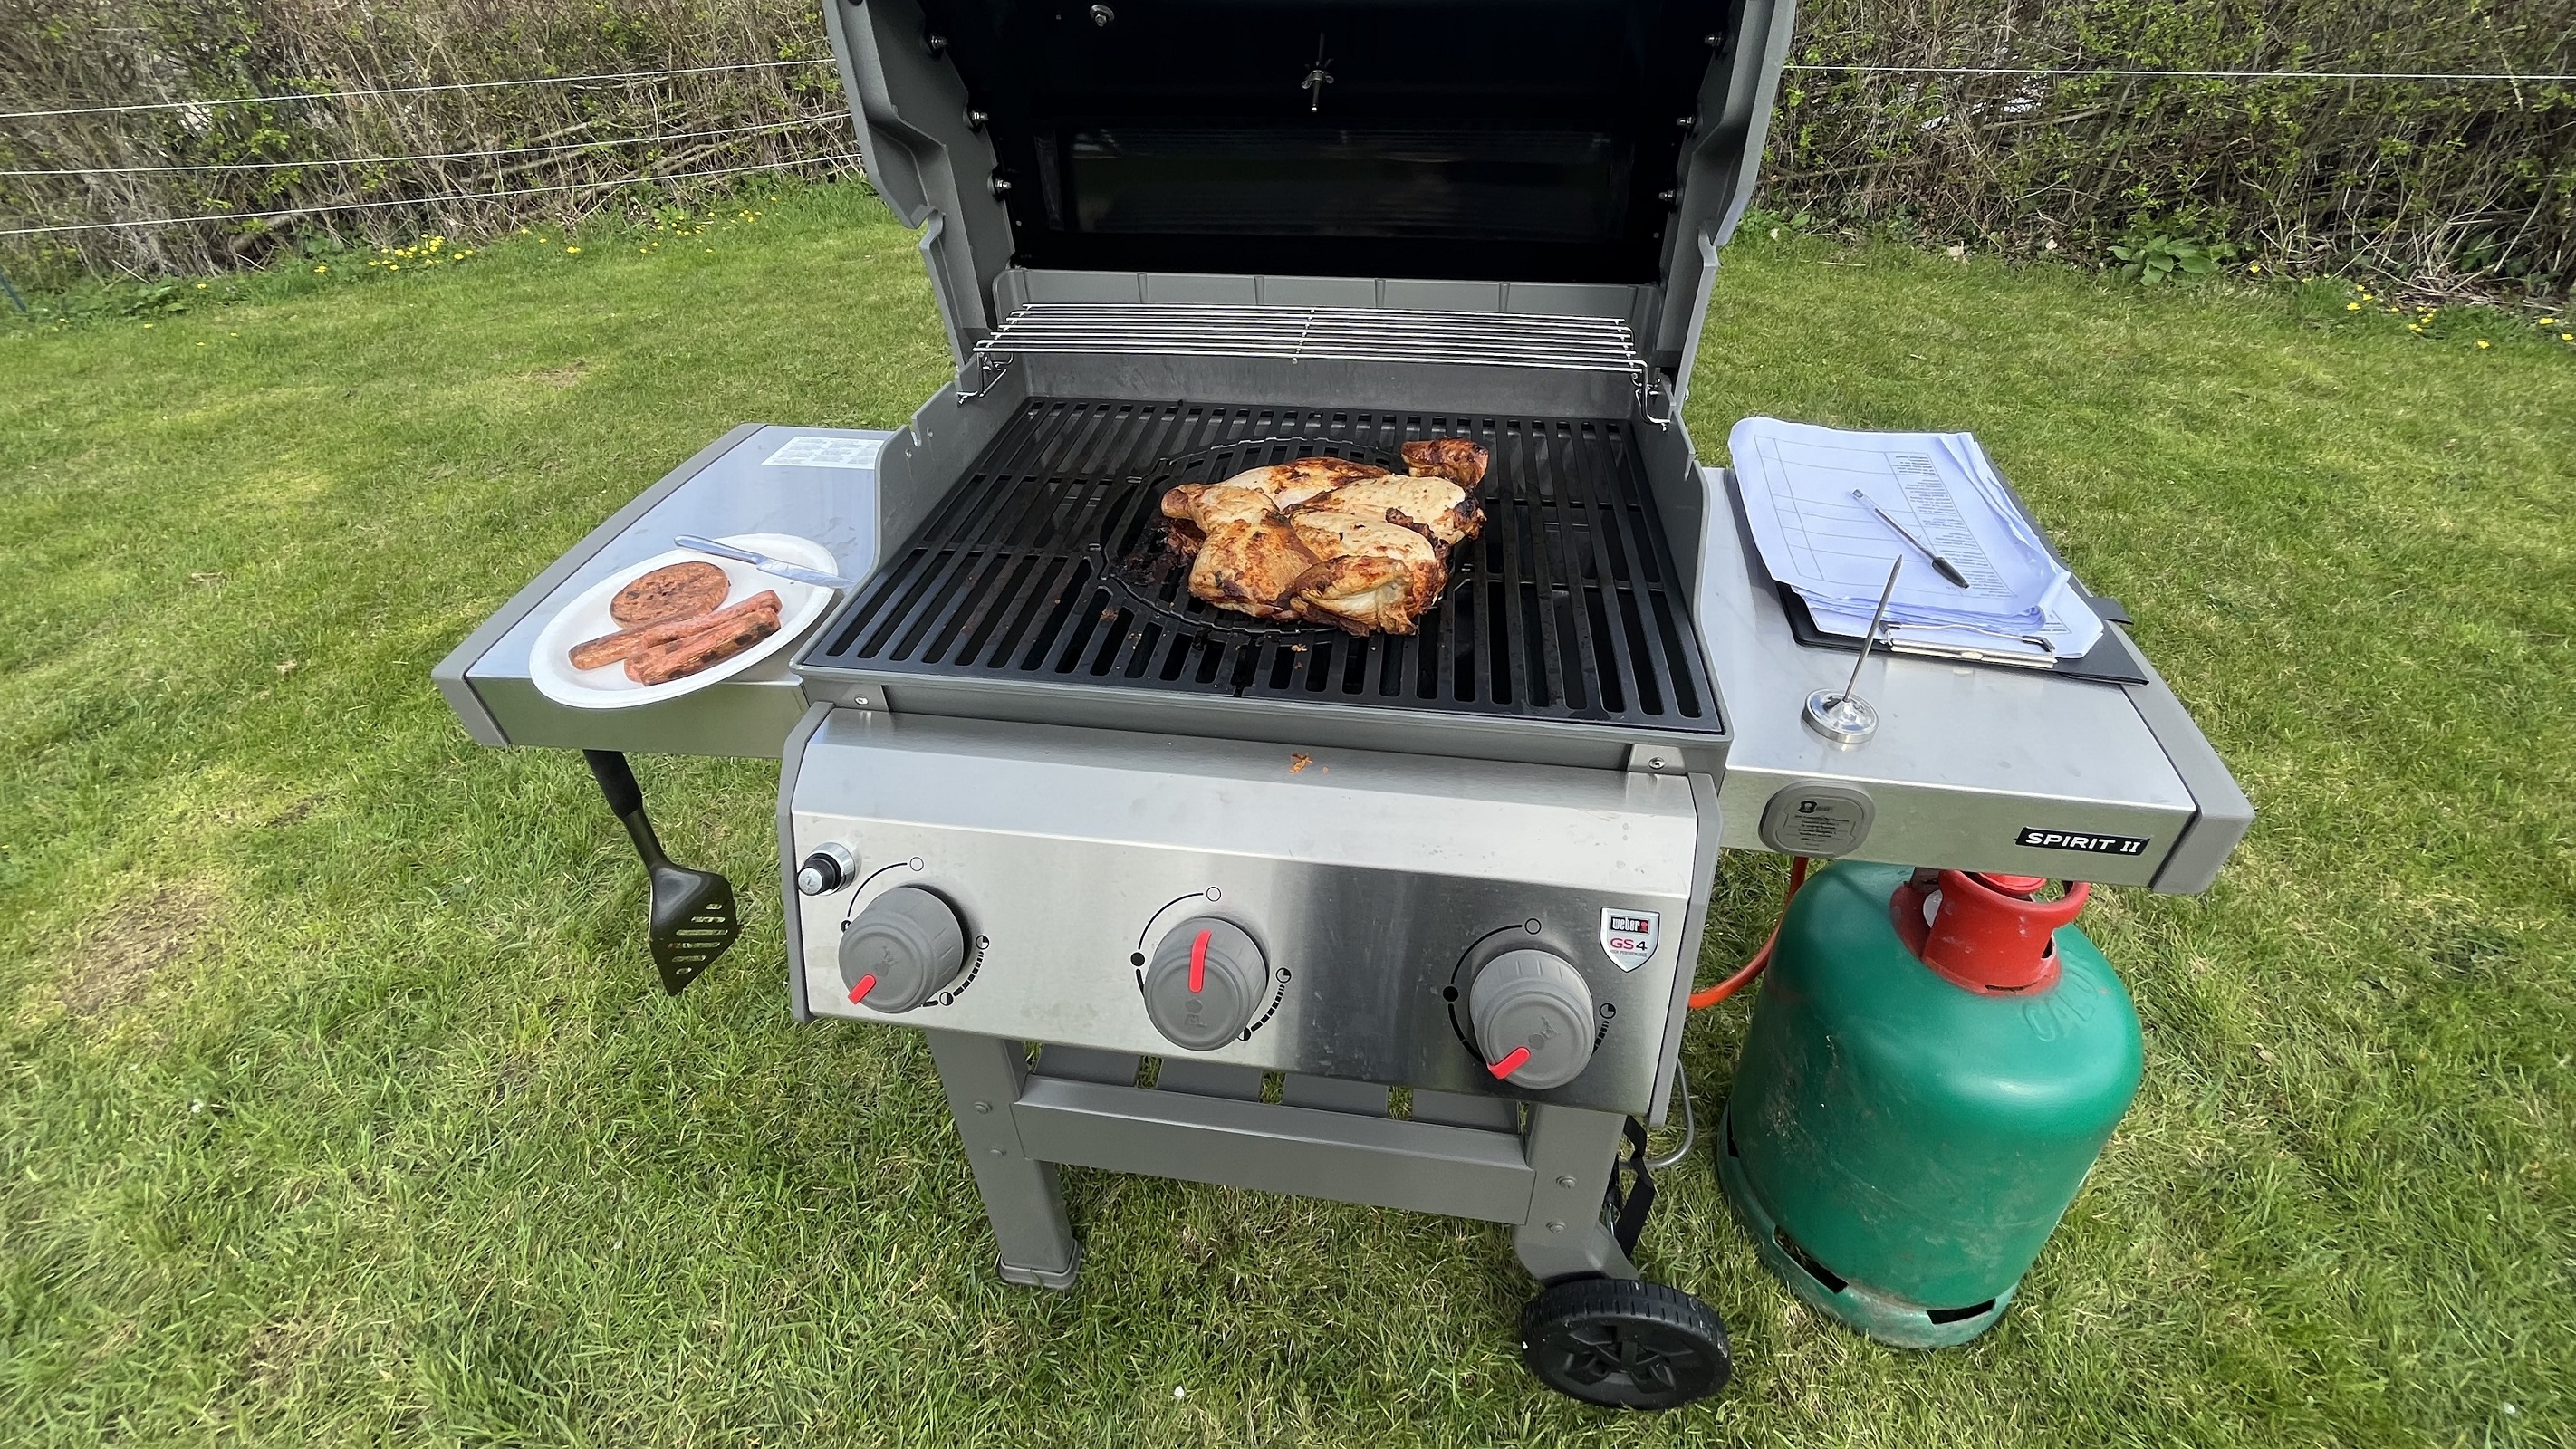 Mose Landmand Atlantic Weber Spirit II E-310 review: a large gas grill with foldable side tables |  Top Ten Reviews